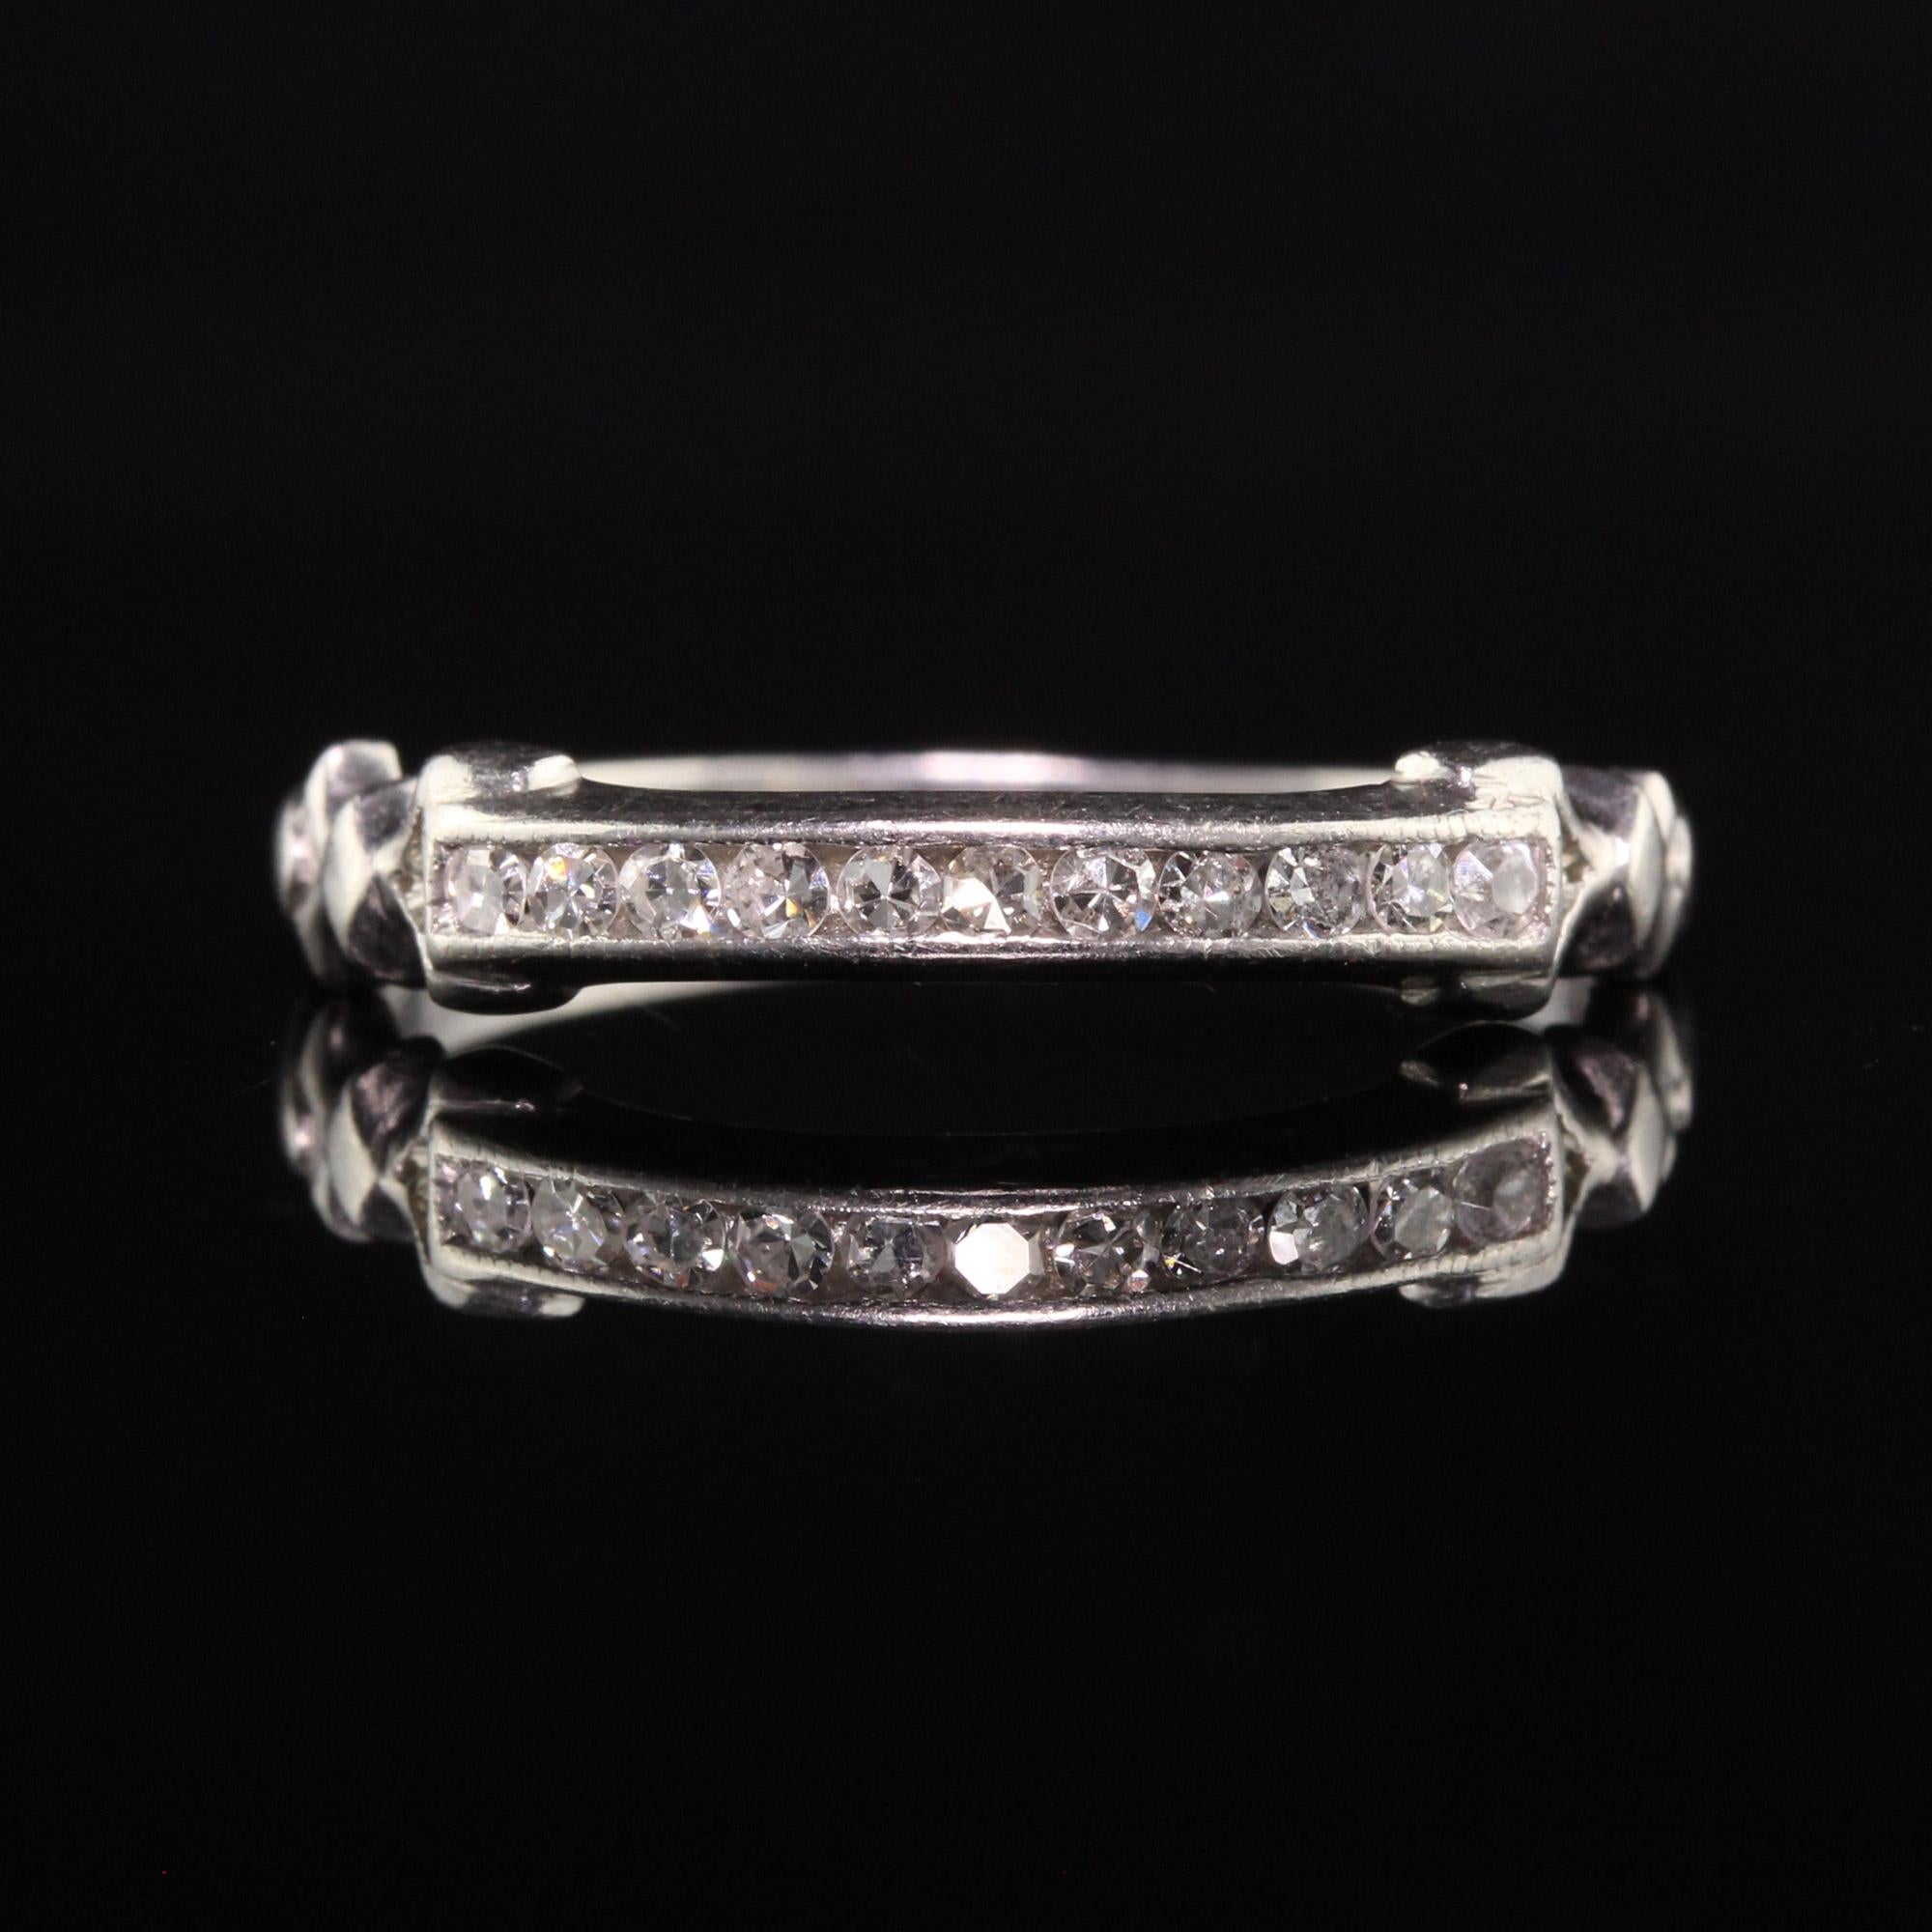 Antique Art Deco Platinum Single Cut Diamond Wedding Band In Good Condition For Sale In Great Neck, NY